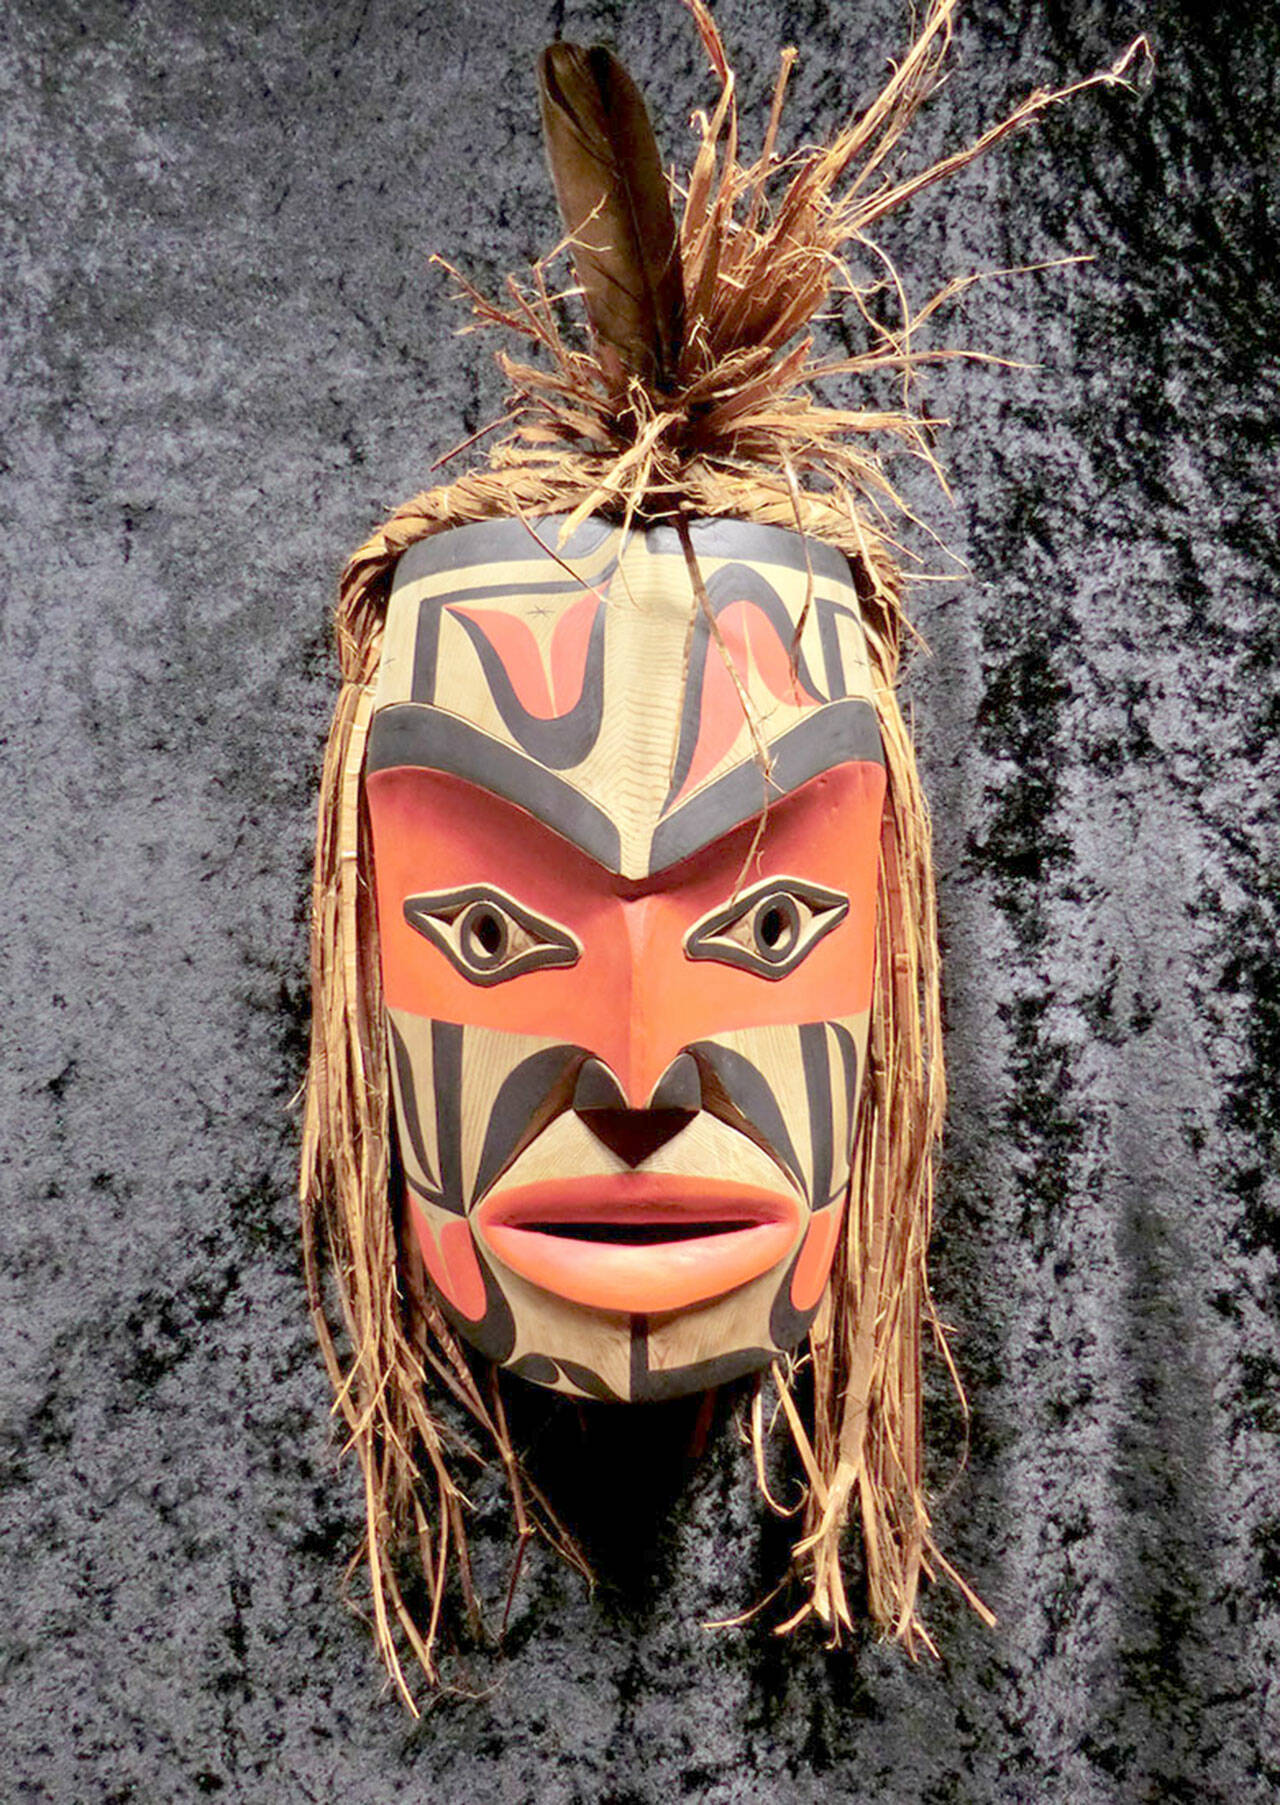 Among goods to be offered during the Makah Museum’s celebration of Saturday are masks such as this Friendship Mask by Alex McCarty.